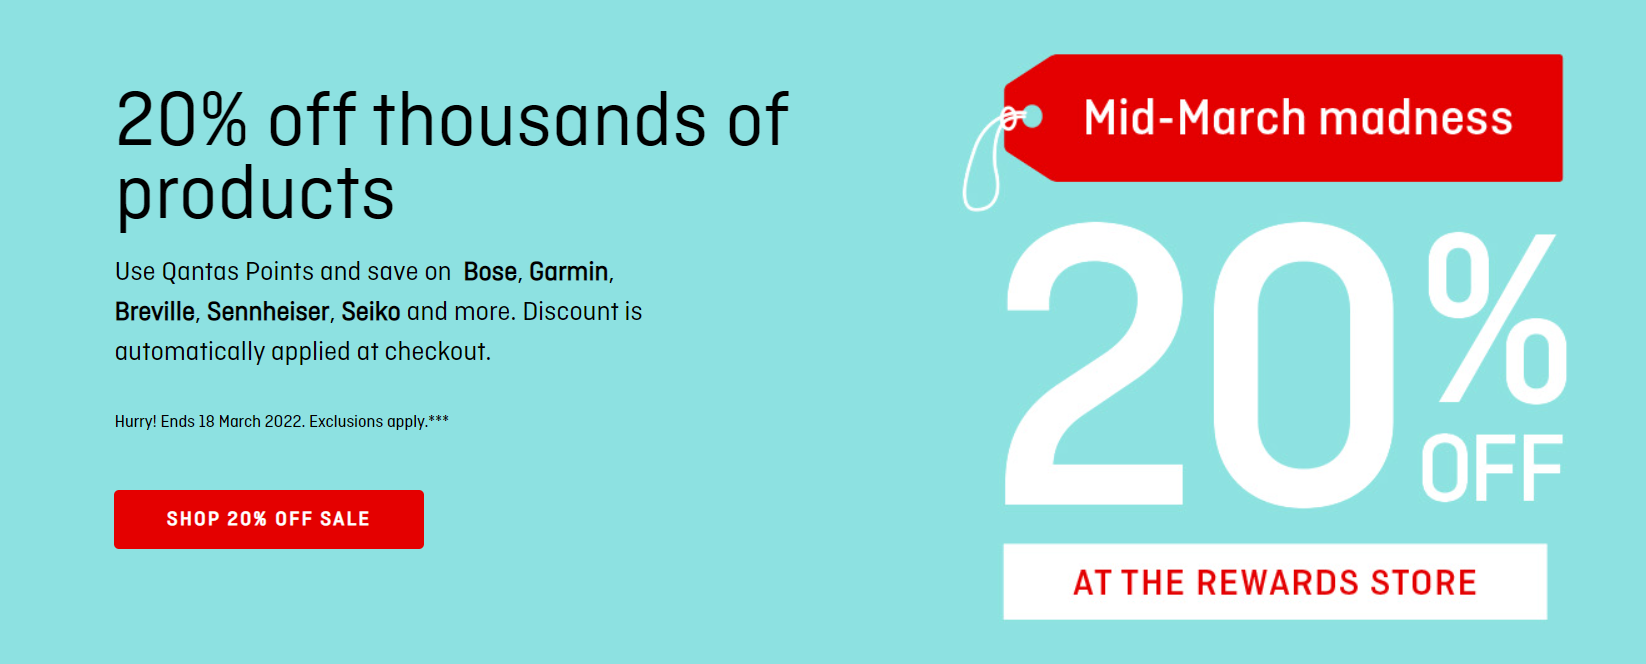 Qantas 20% OFF on thousands of products from Bose, Garmin, Seiko, &more + free delivery